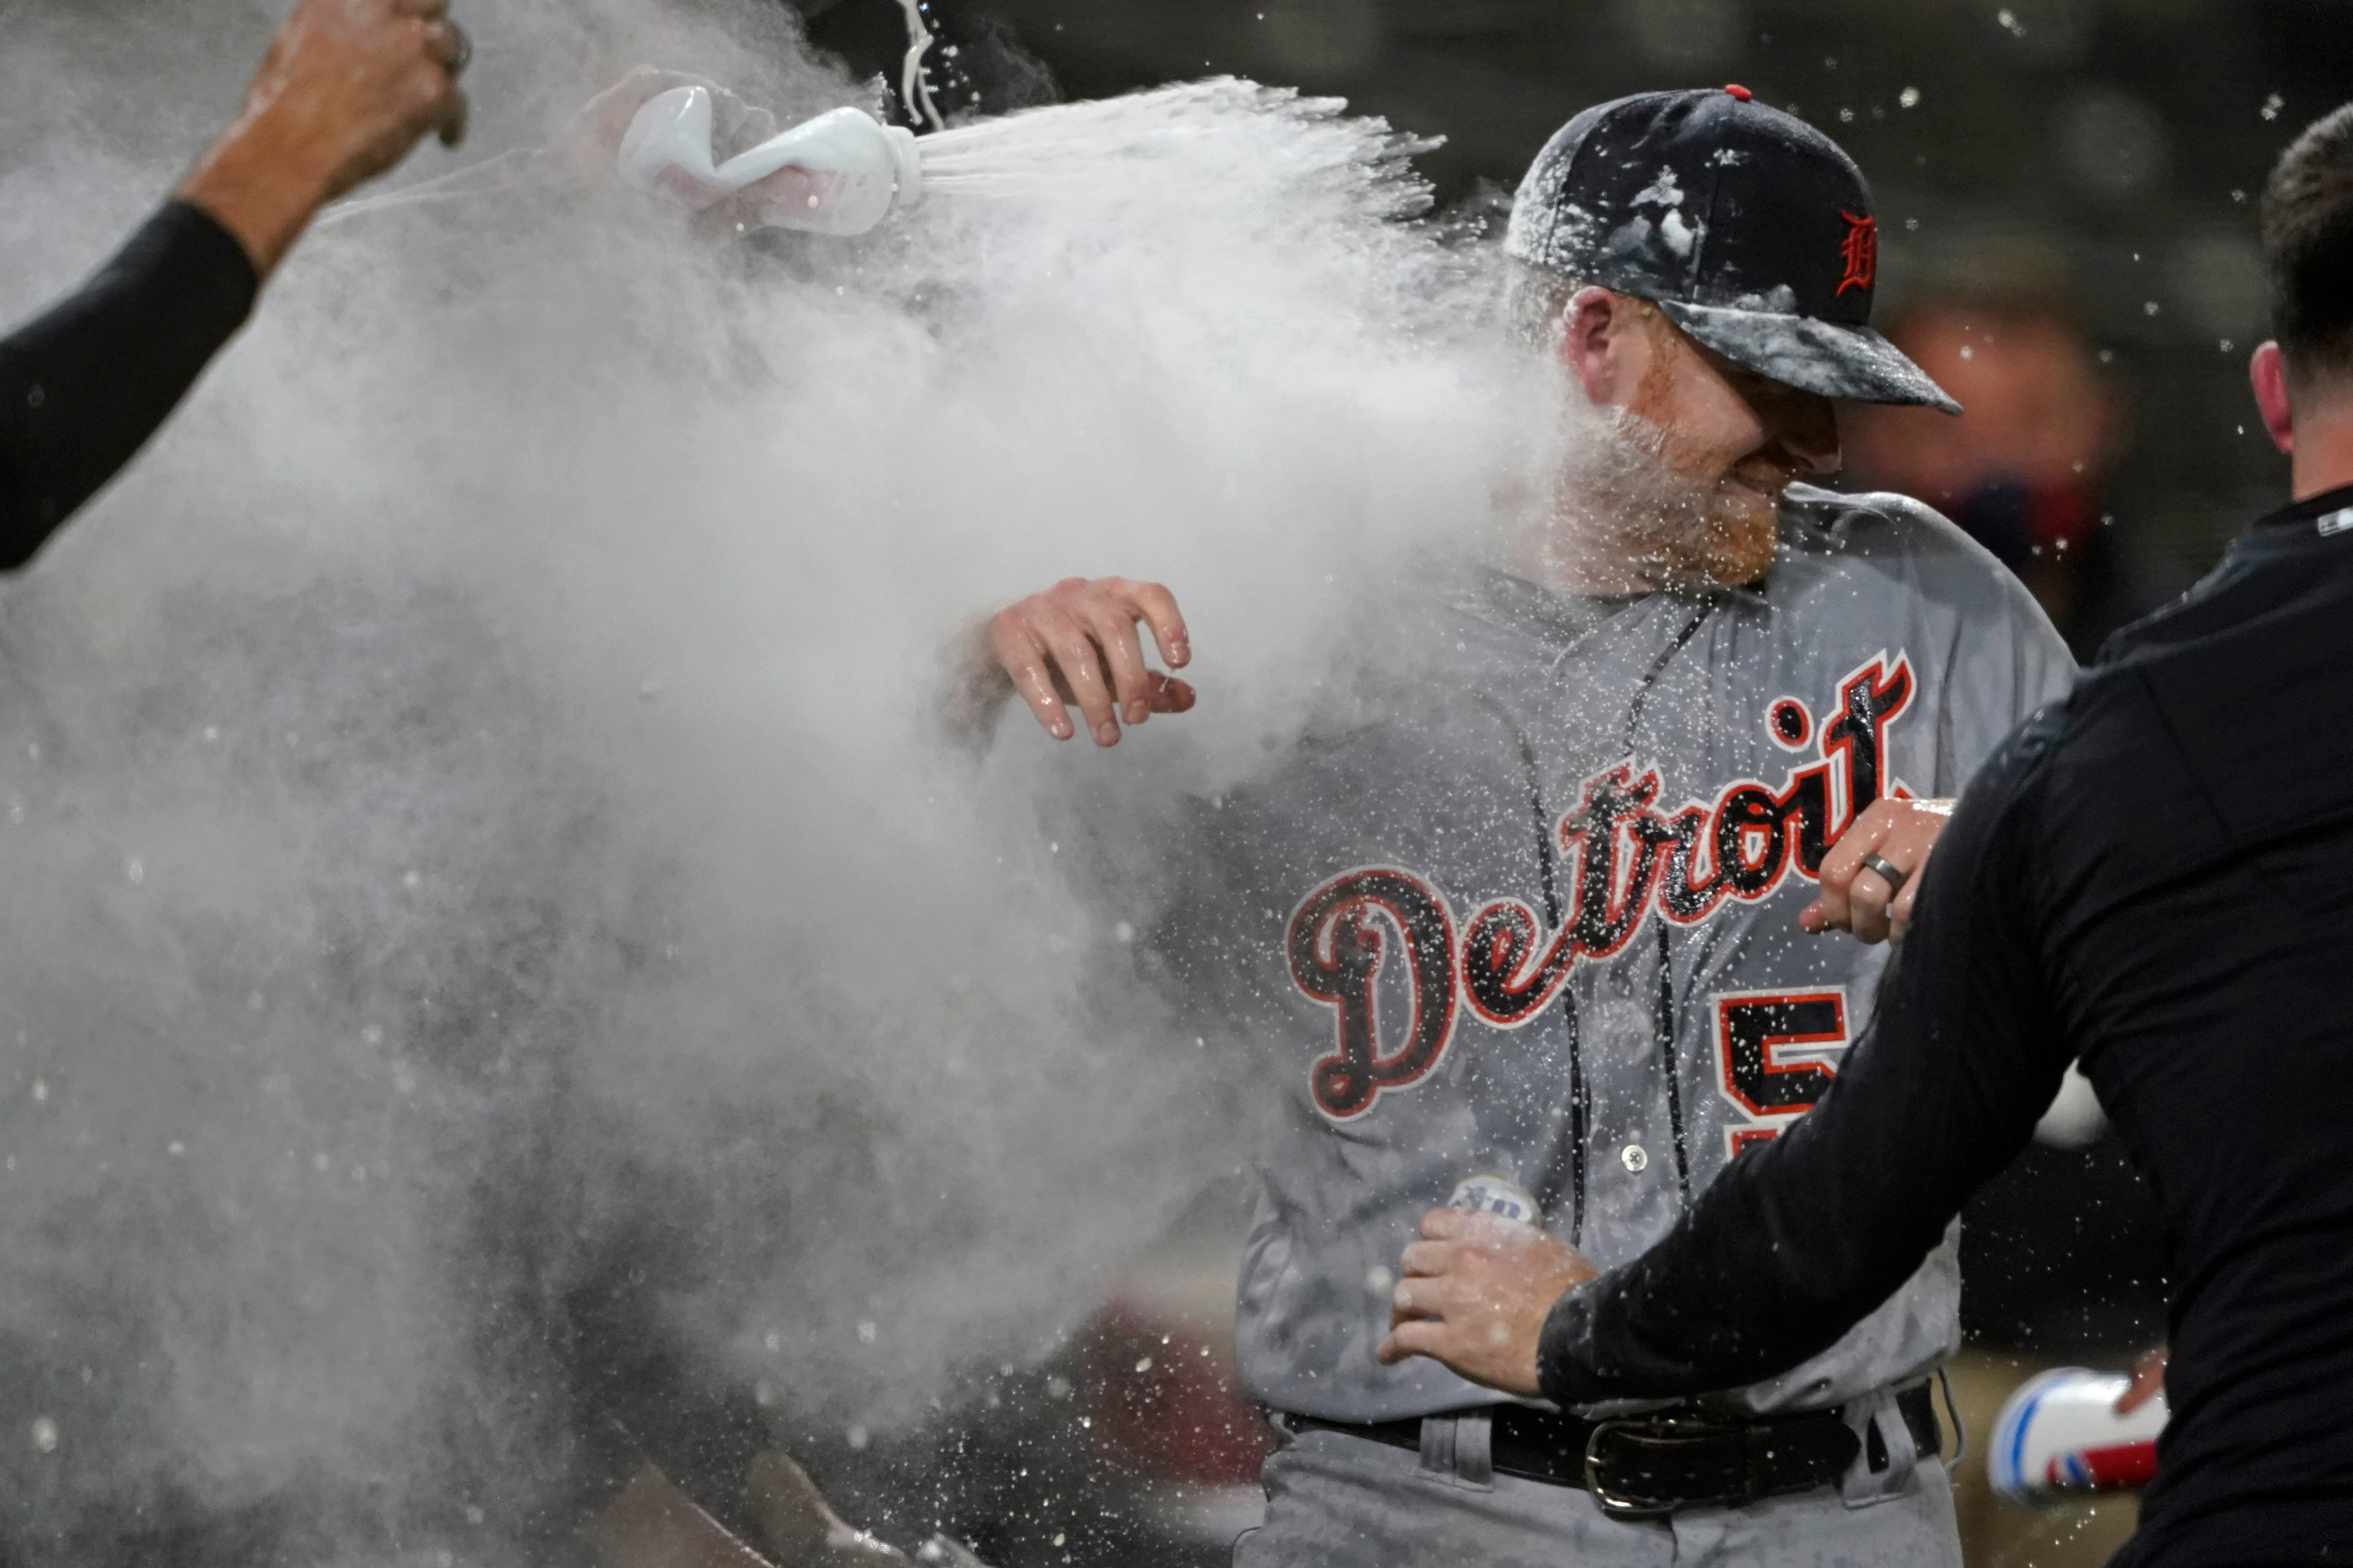 Detroit Tigers starting pitcher Spencer Turnbull (56) is showered with beer and powder by teammates after Turnbull threw a no-hitter in the team's baseball game against the Seattle Mariners, Tuesday, May 18, 2021, in Seattle.